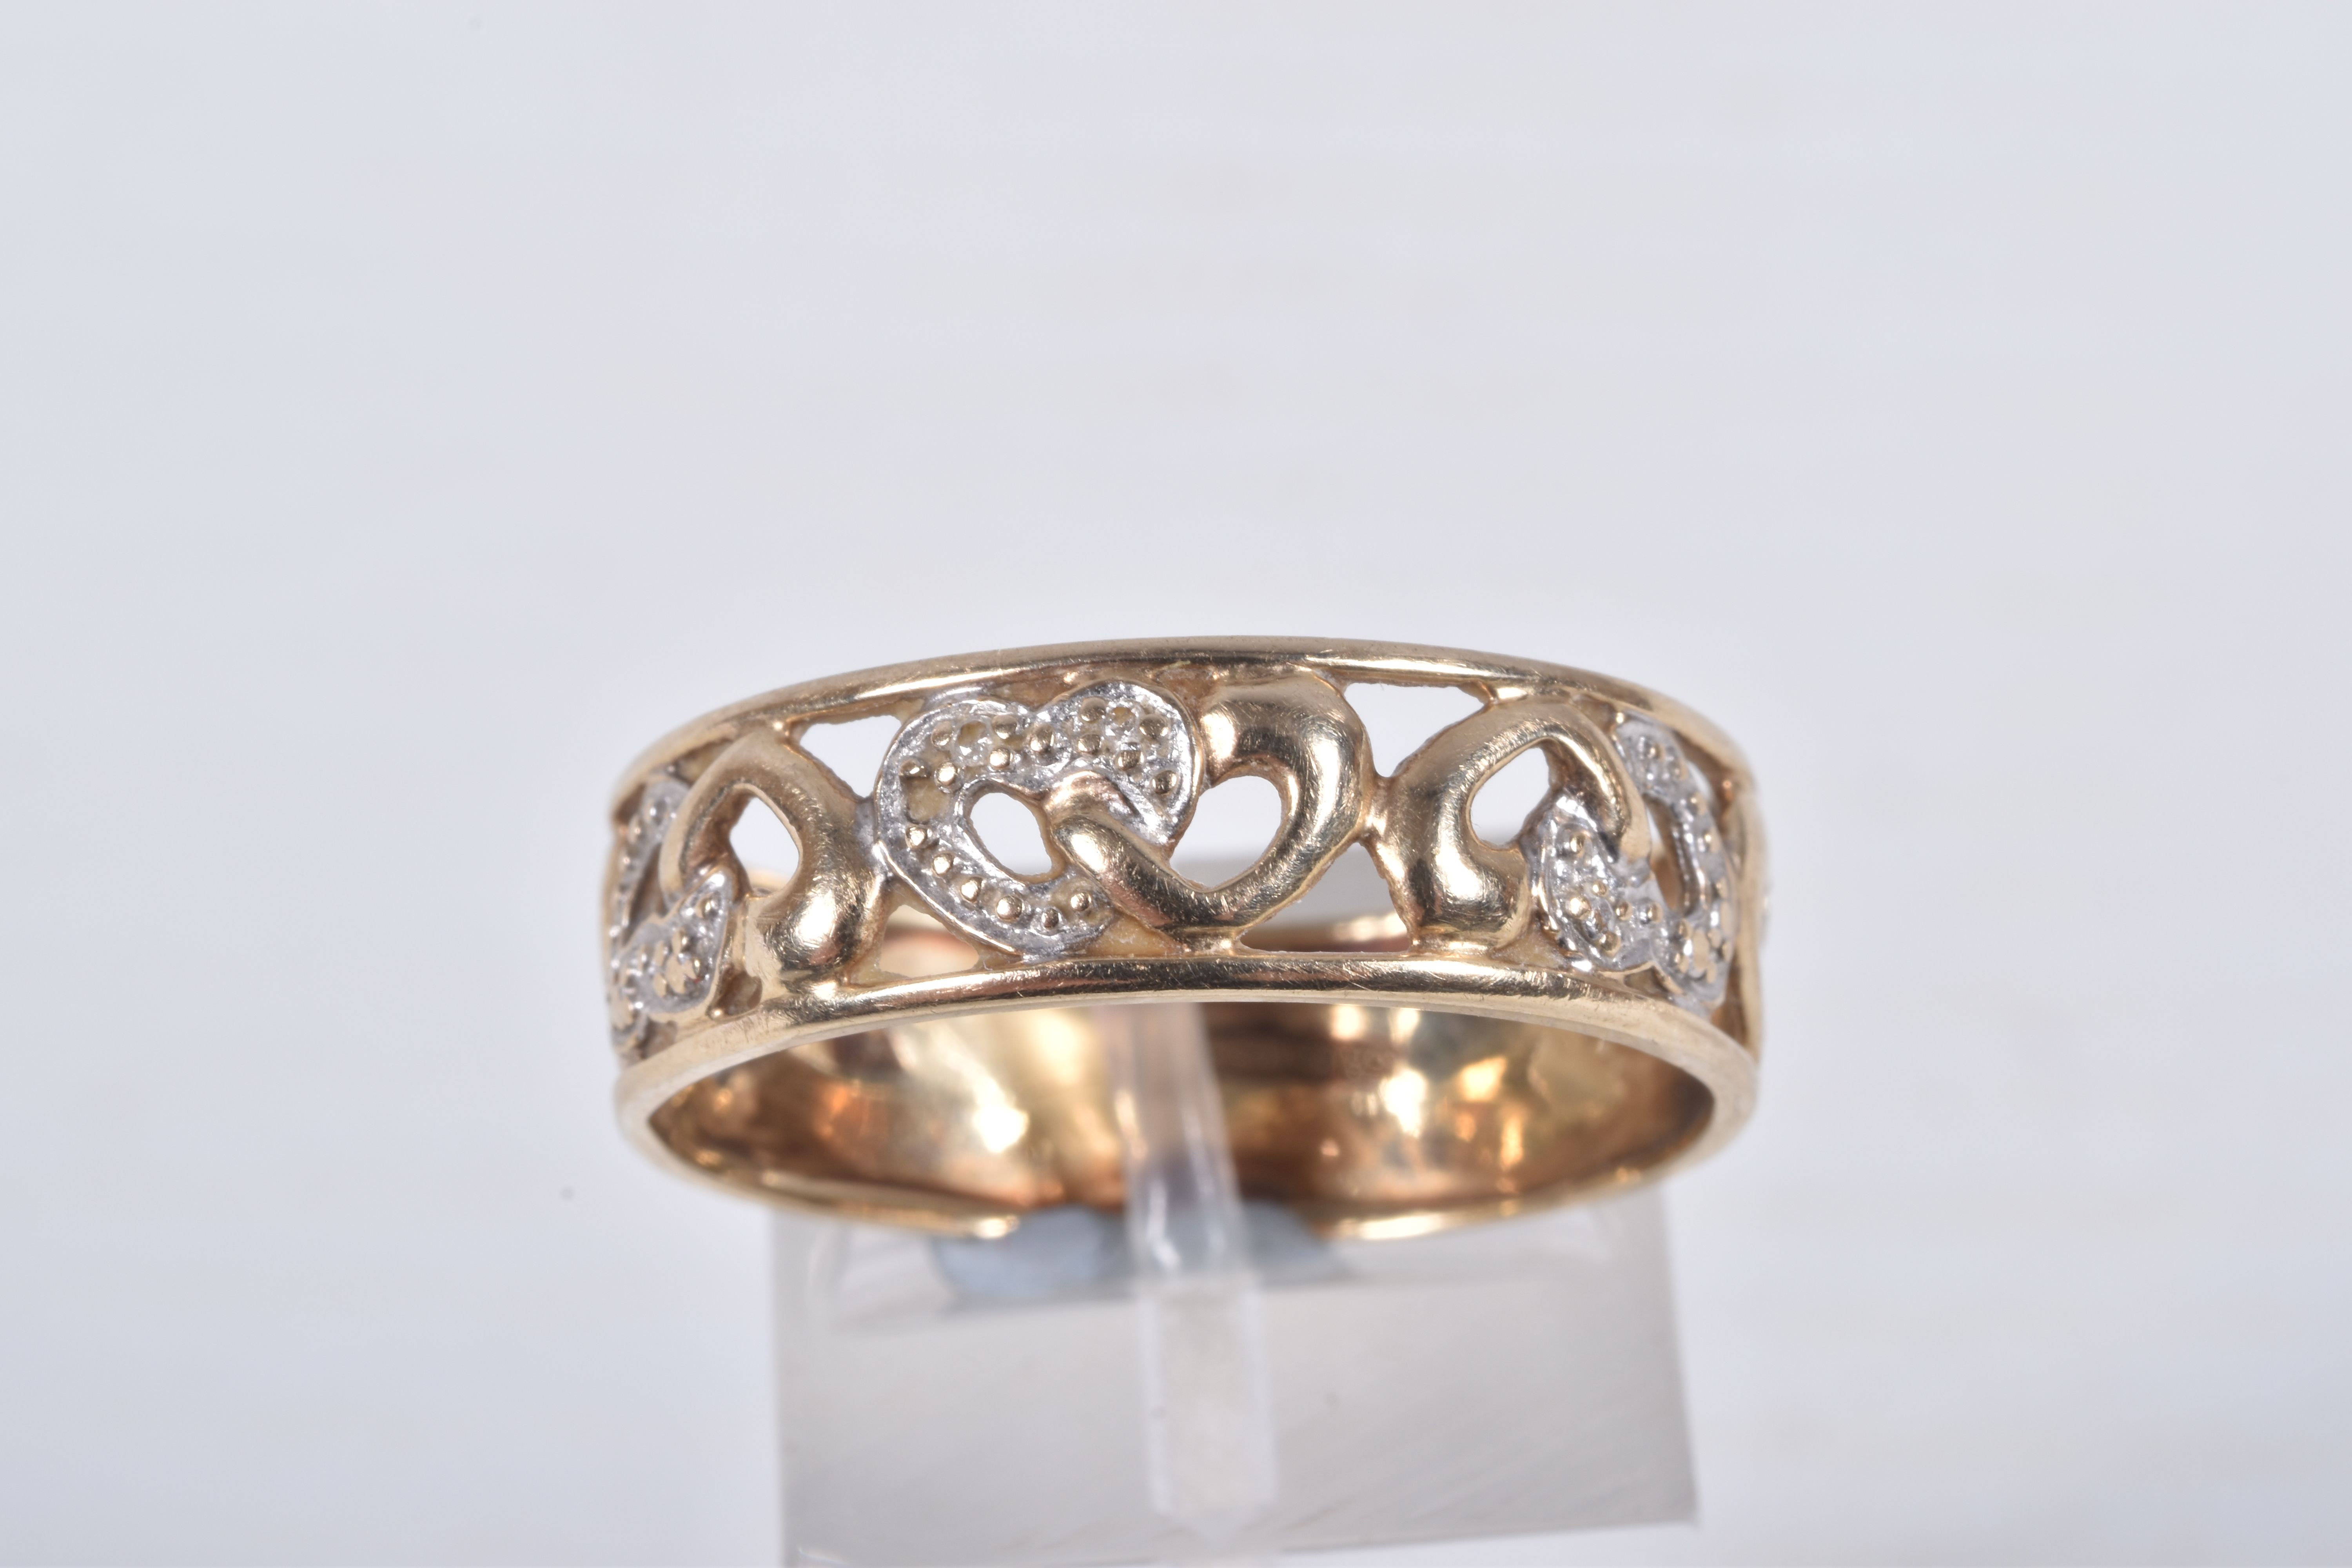 A 9CT GOLD BAND RING, open work wide band, detailed with hearts set with single cut diamond accents, - Image 2 of 4